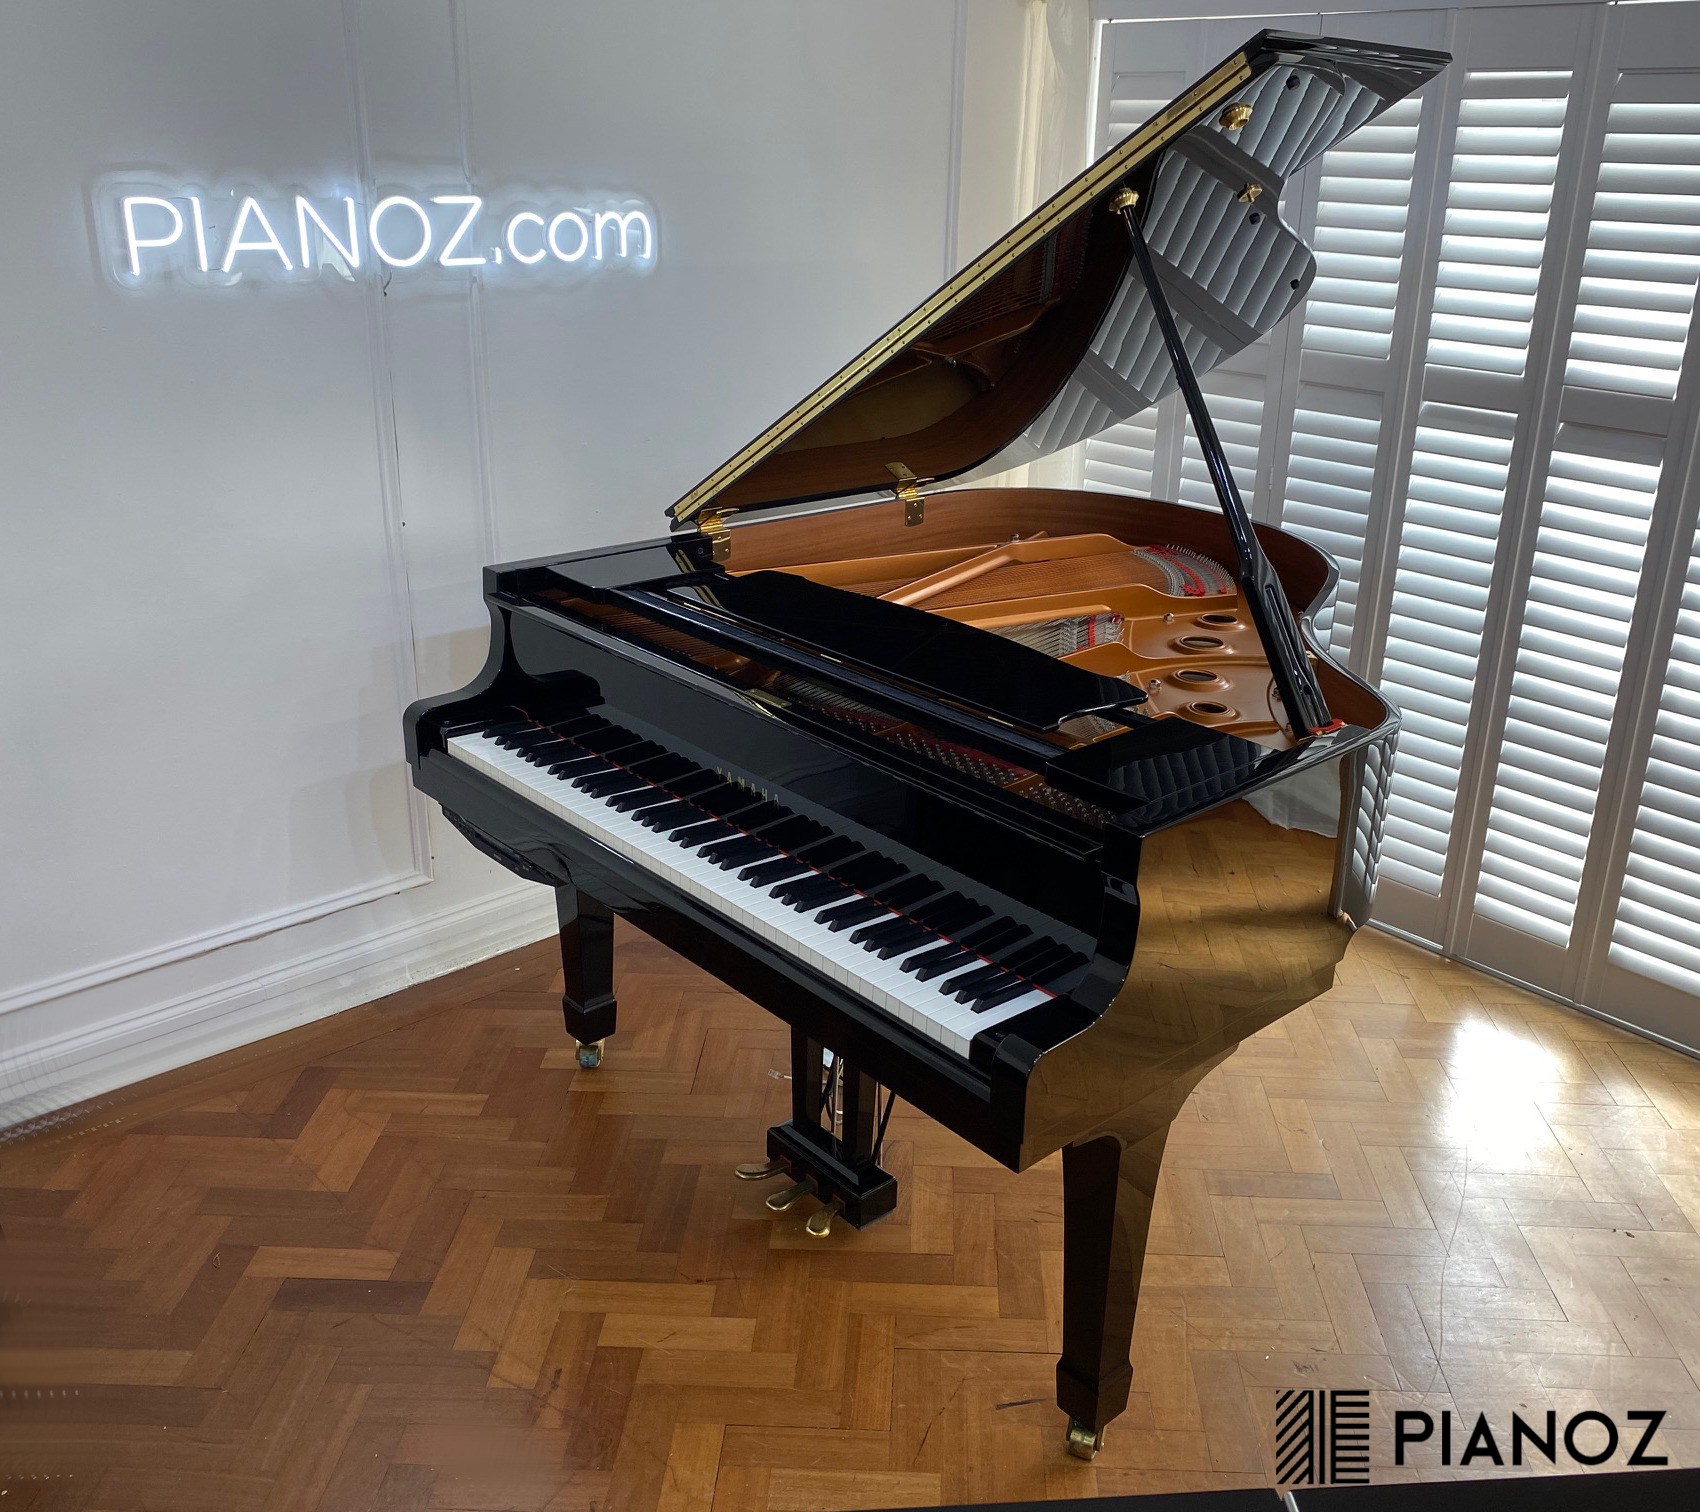 Yamaha C1 Disklavier Silent Baby Grand Piano piano for sale in UK